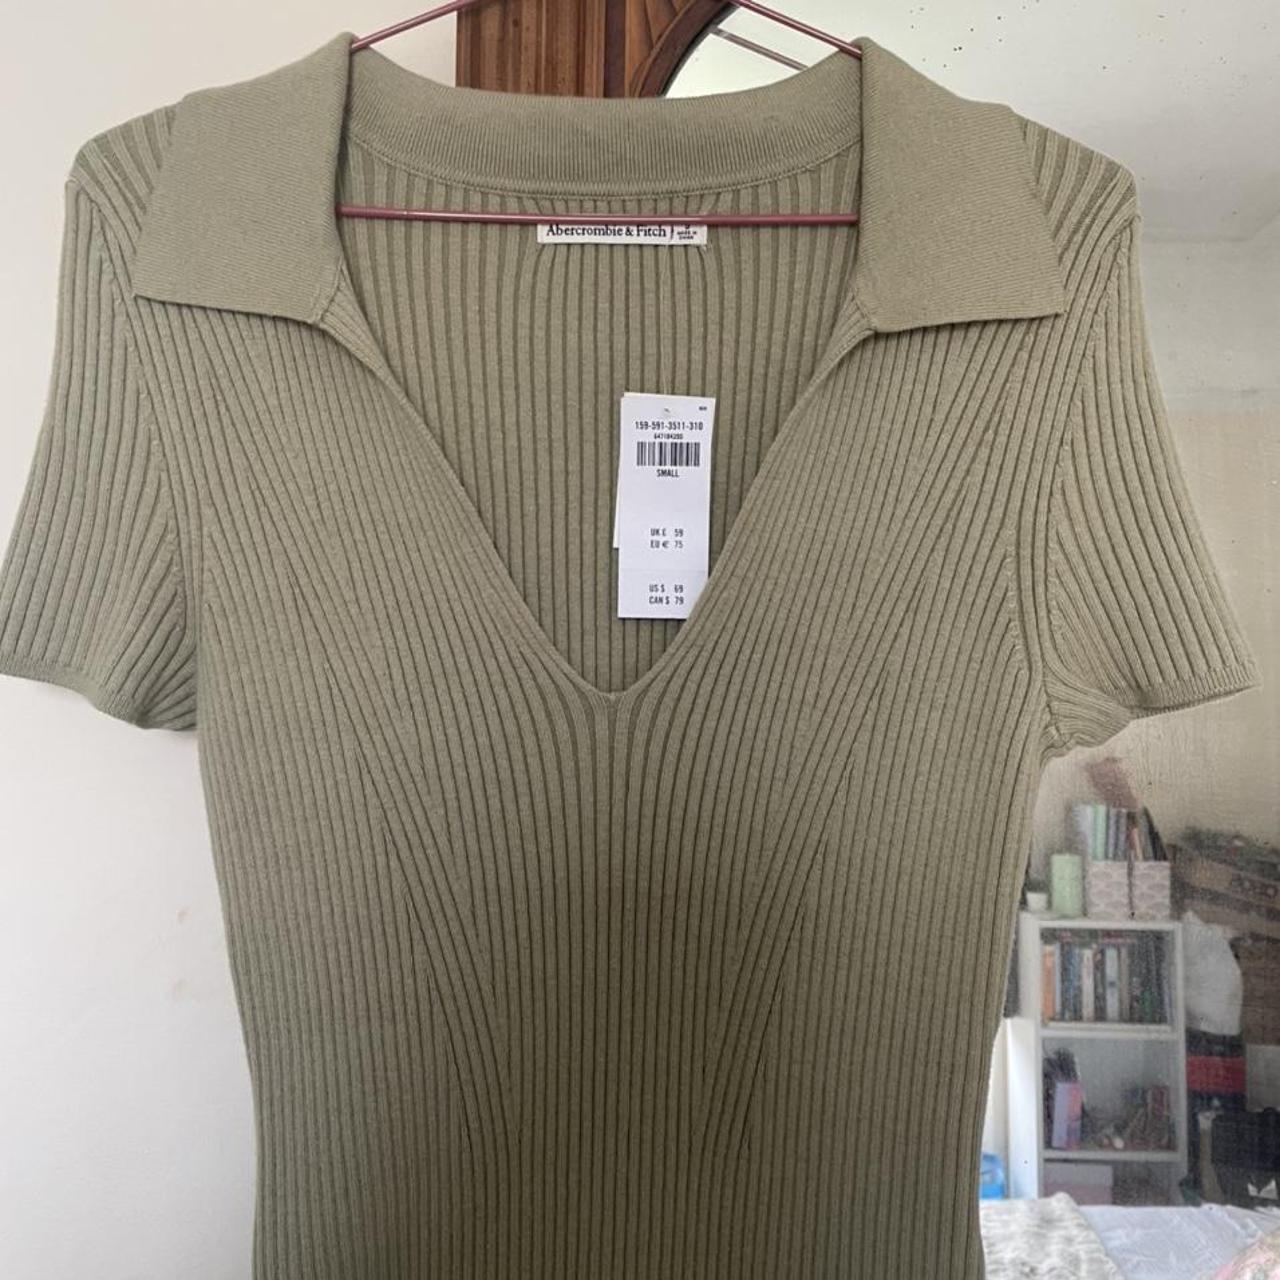 Abercrombie and fitch sage green mini dress with... - Depop